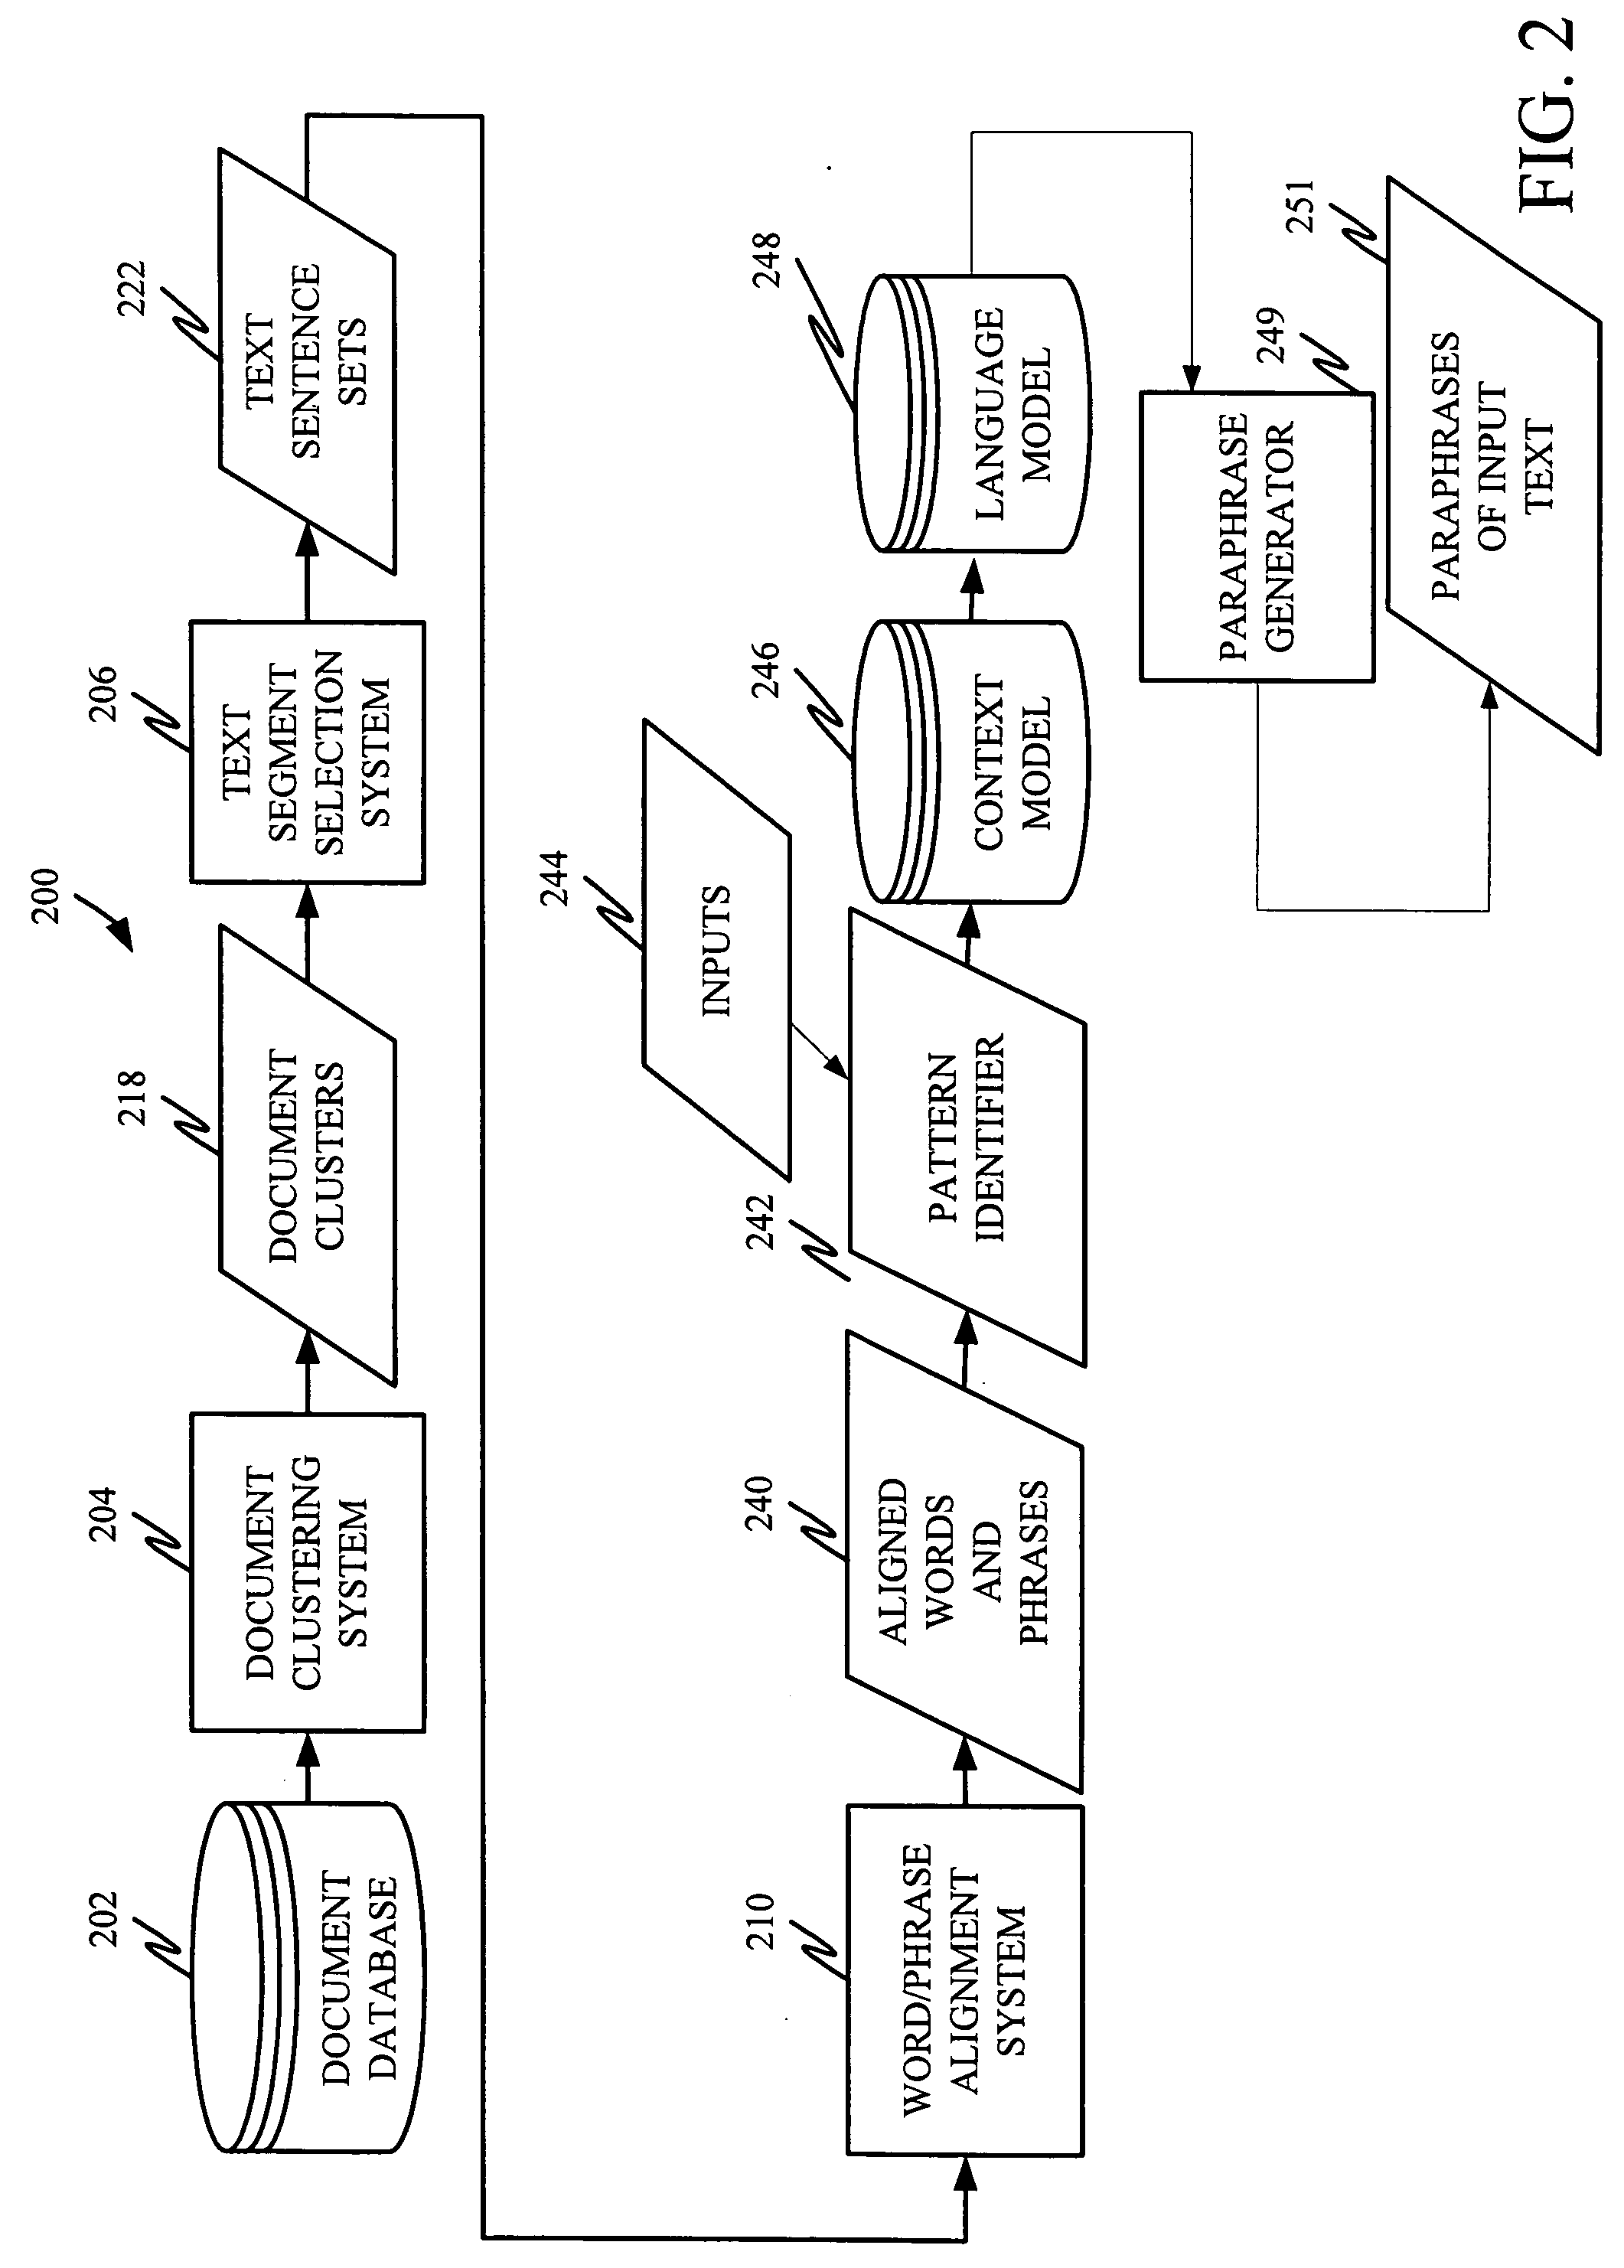 Unsupervised learning of paraphrase/translation alternations and selective application thereof